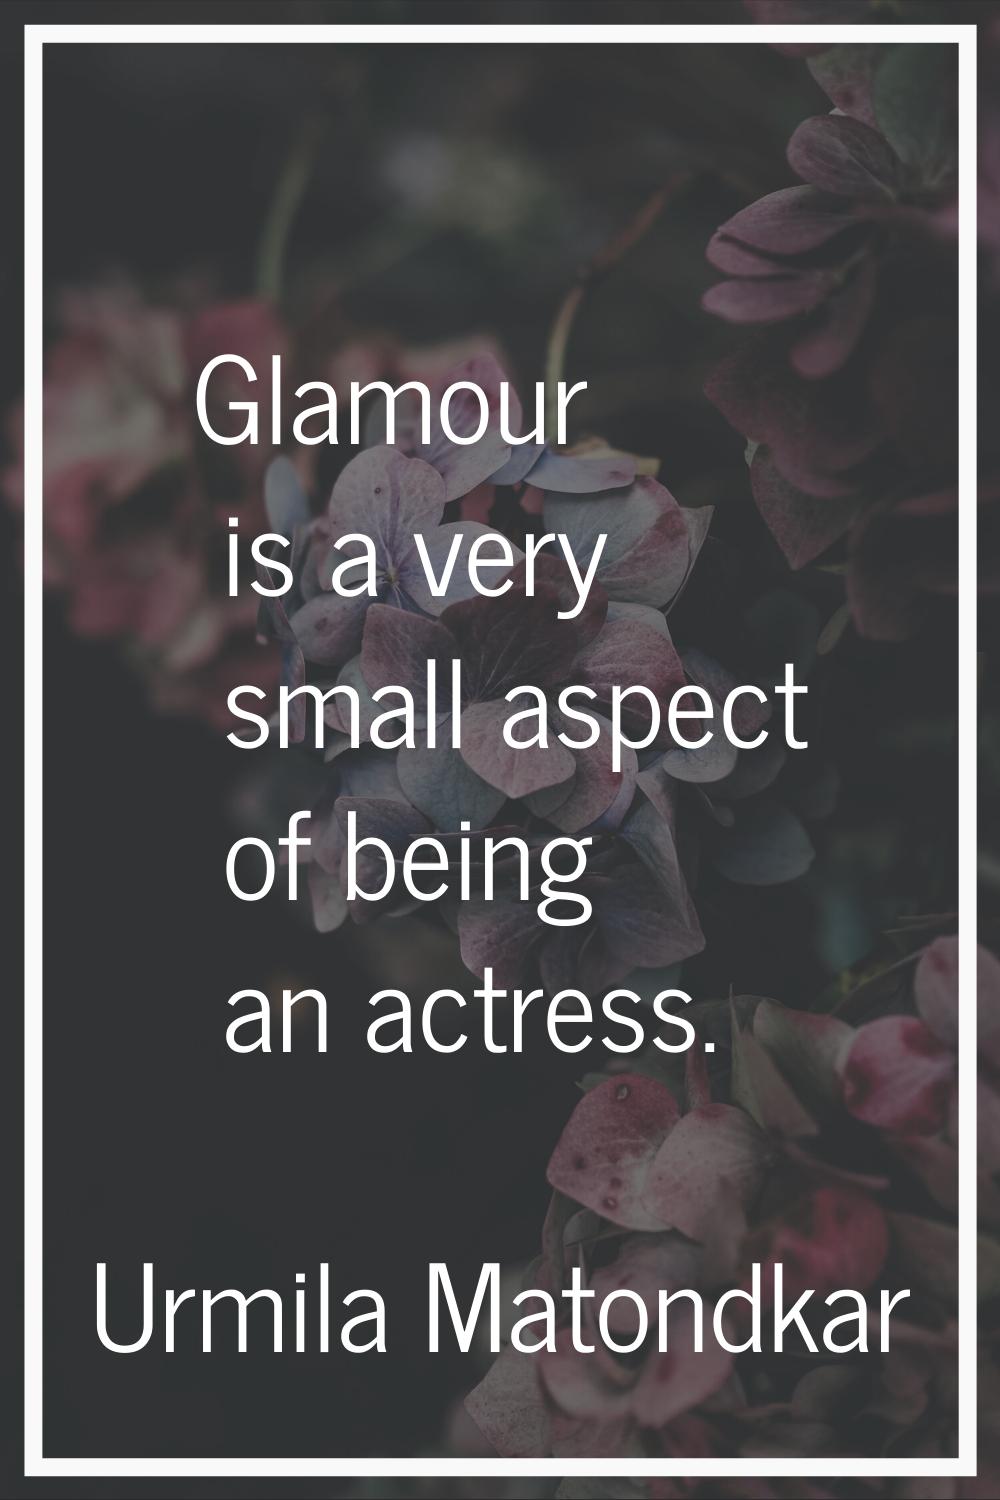 Glamour is a very small aspect of being an actress.